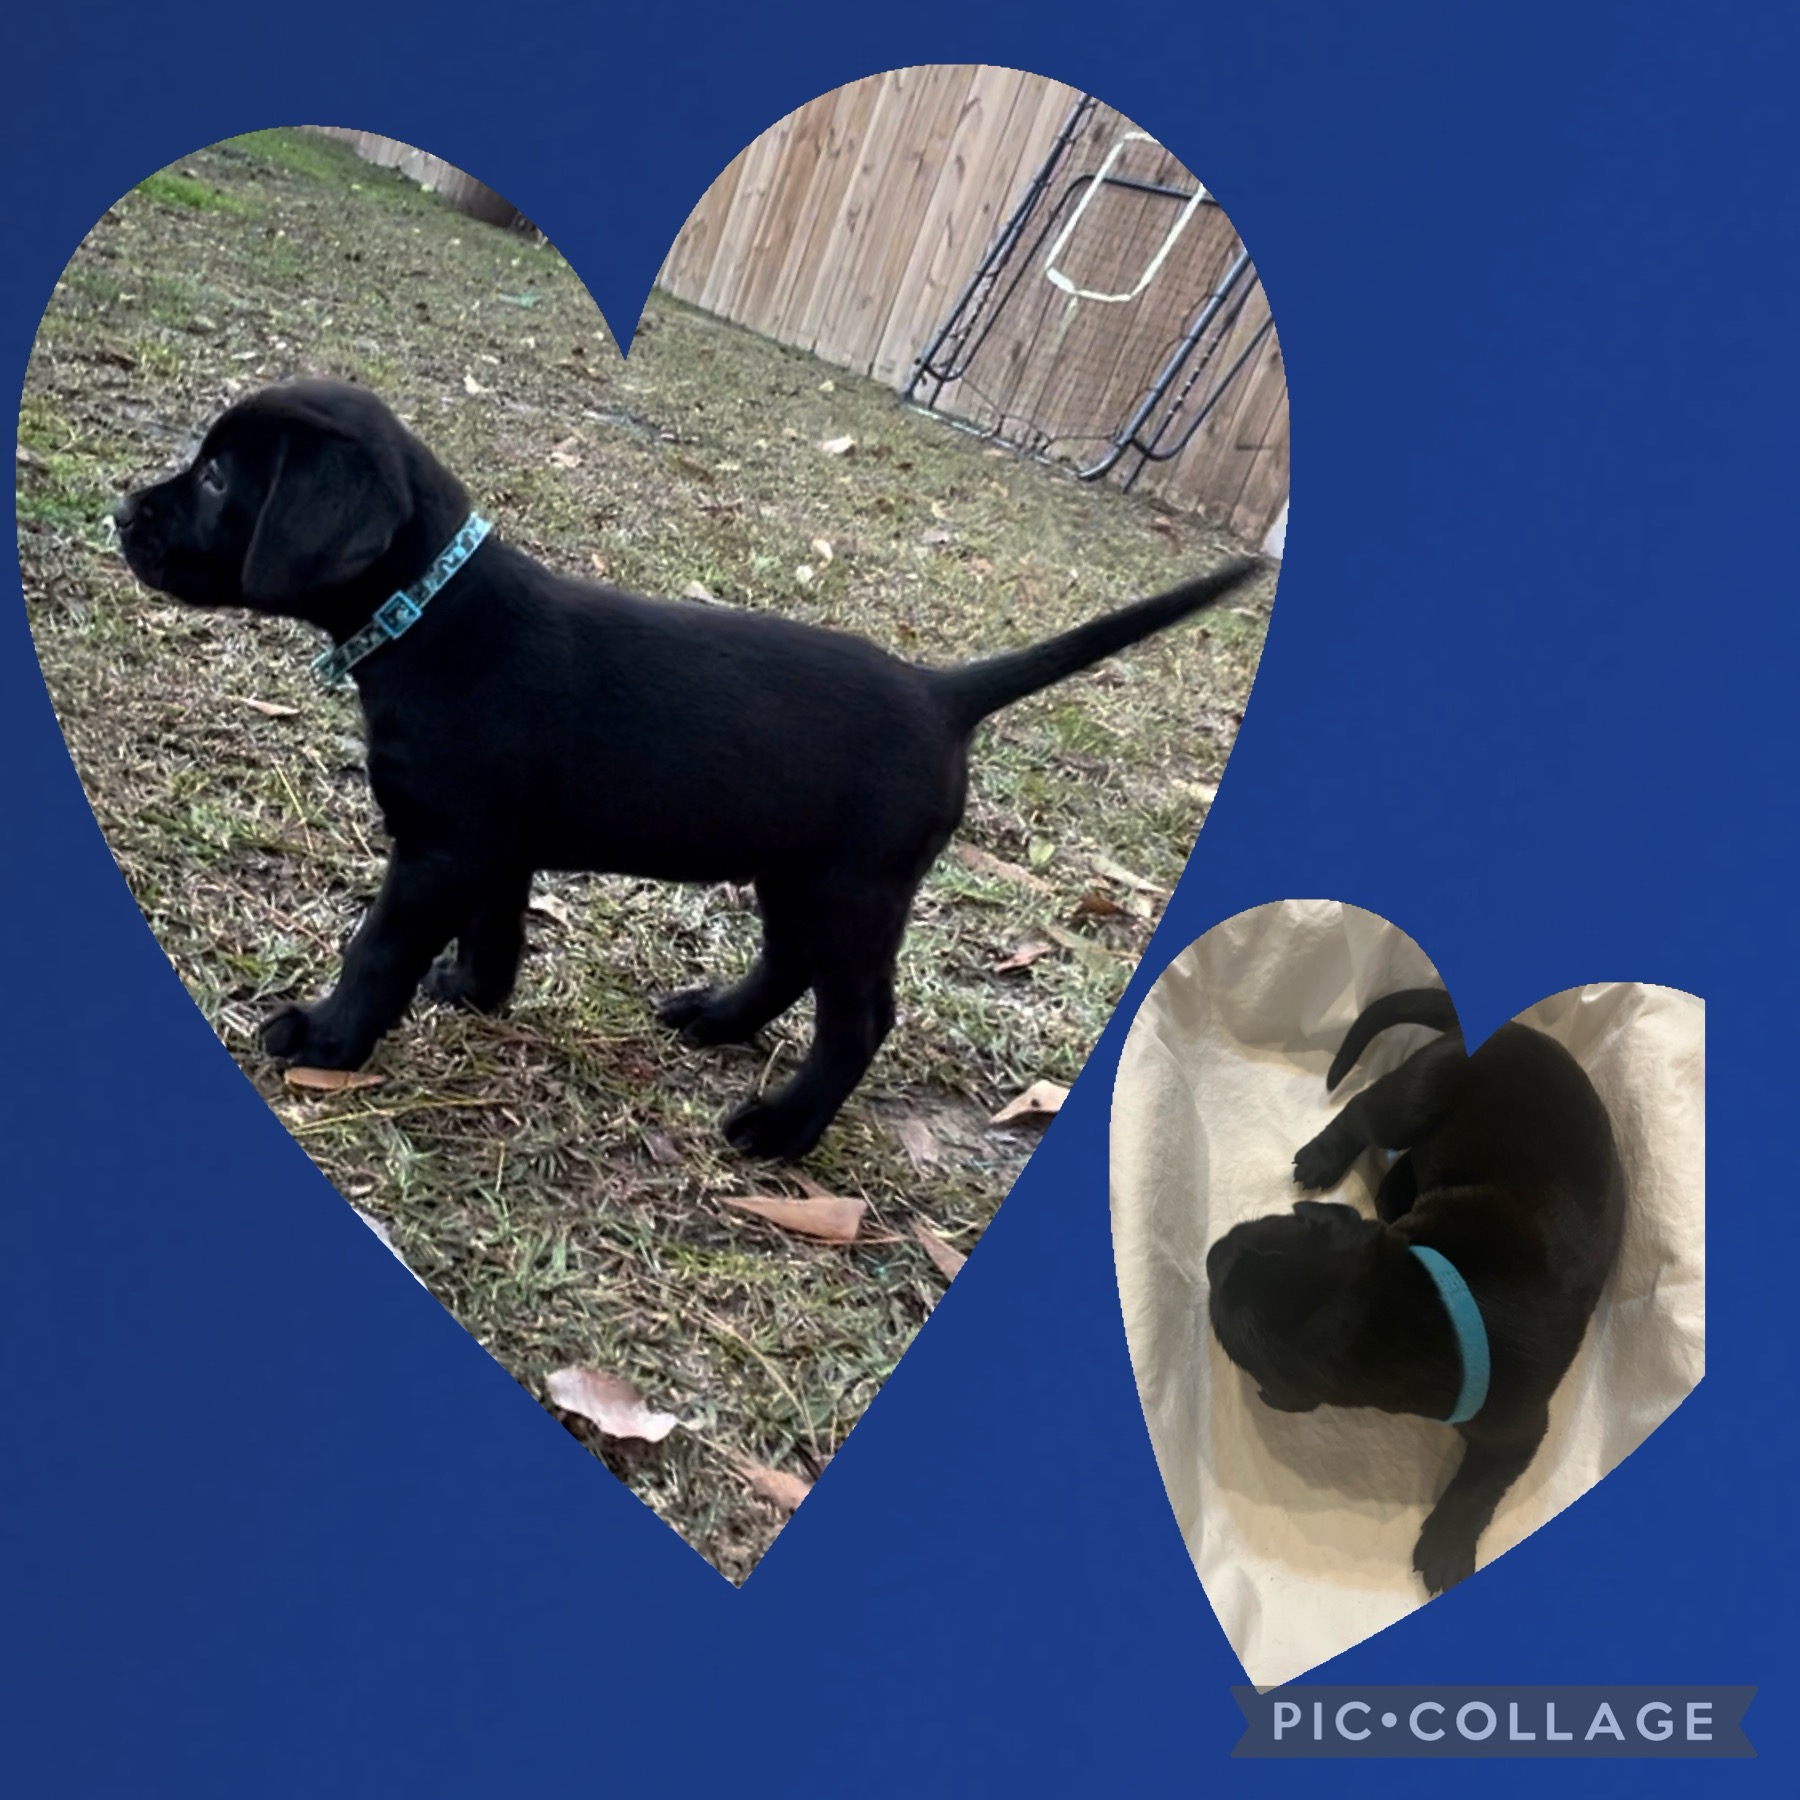 Registered AKC Lab Puppies for Sale!